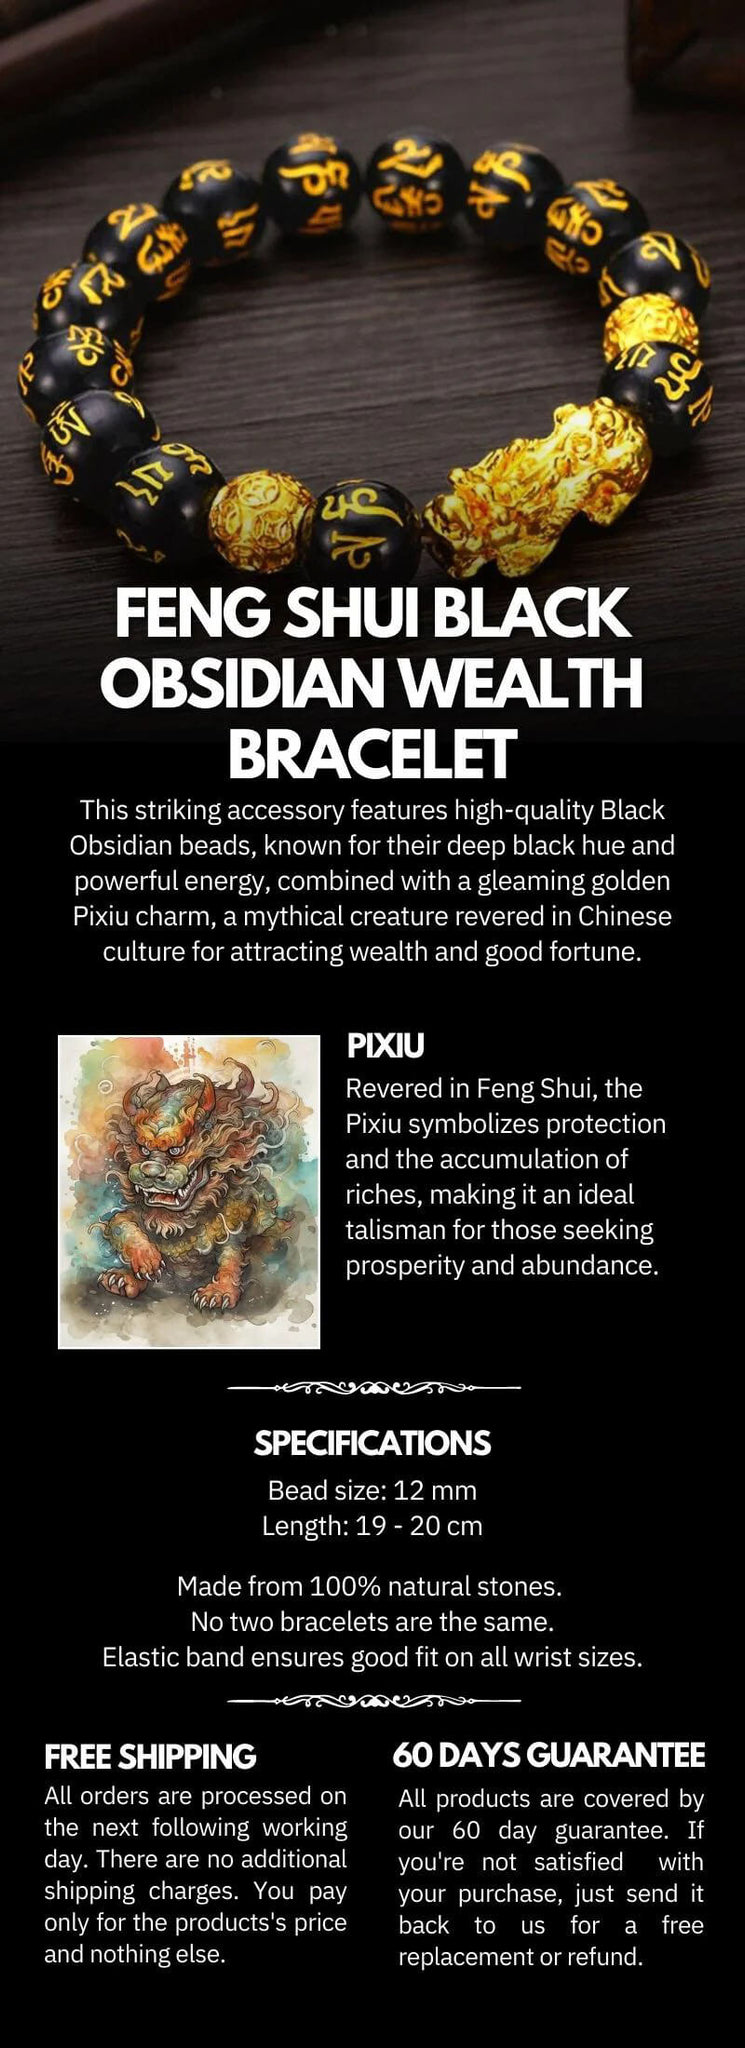 Does The Feng Shui Black Obsidian Bracelet Really Bring Wealth? - Review |  Higgypop Paranormal